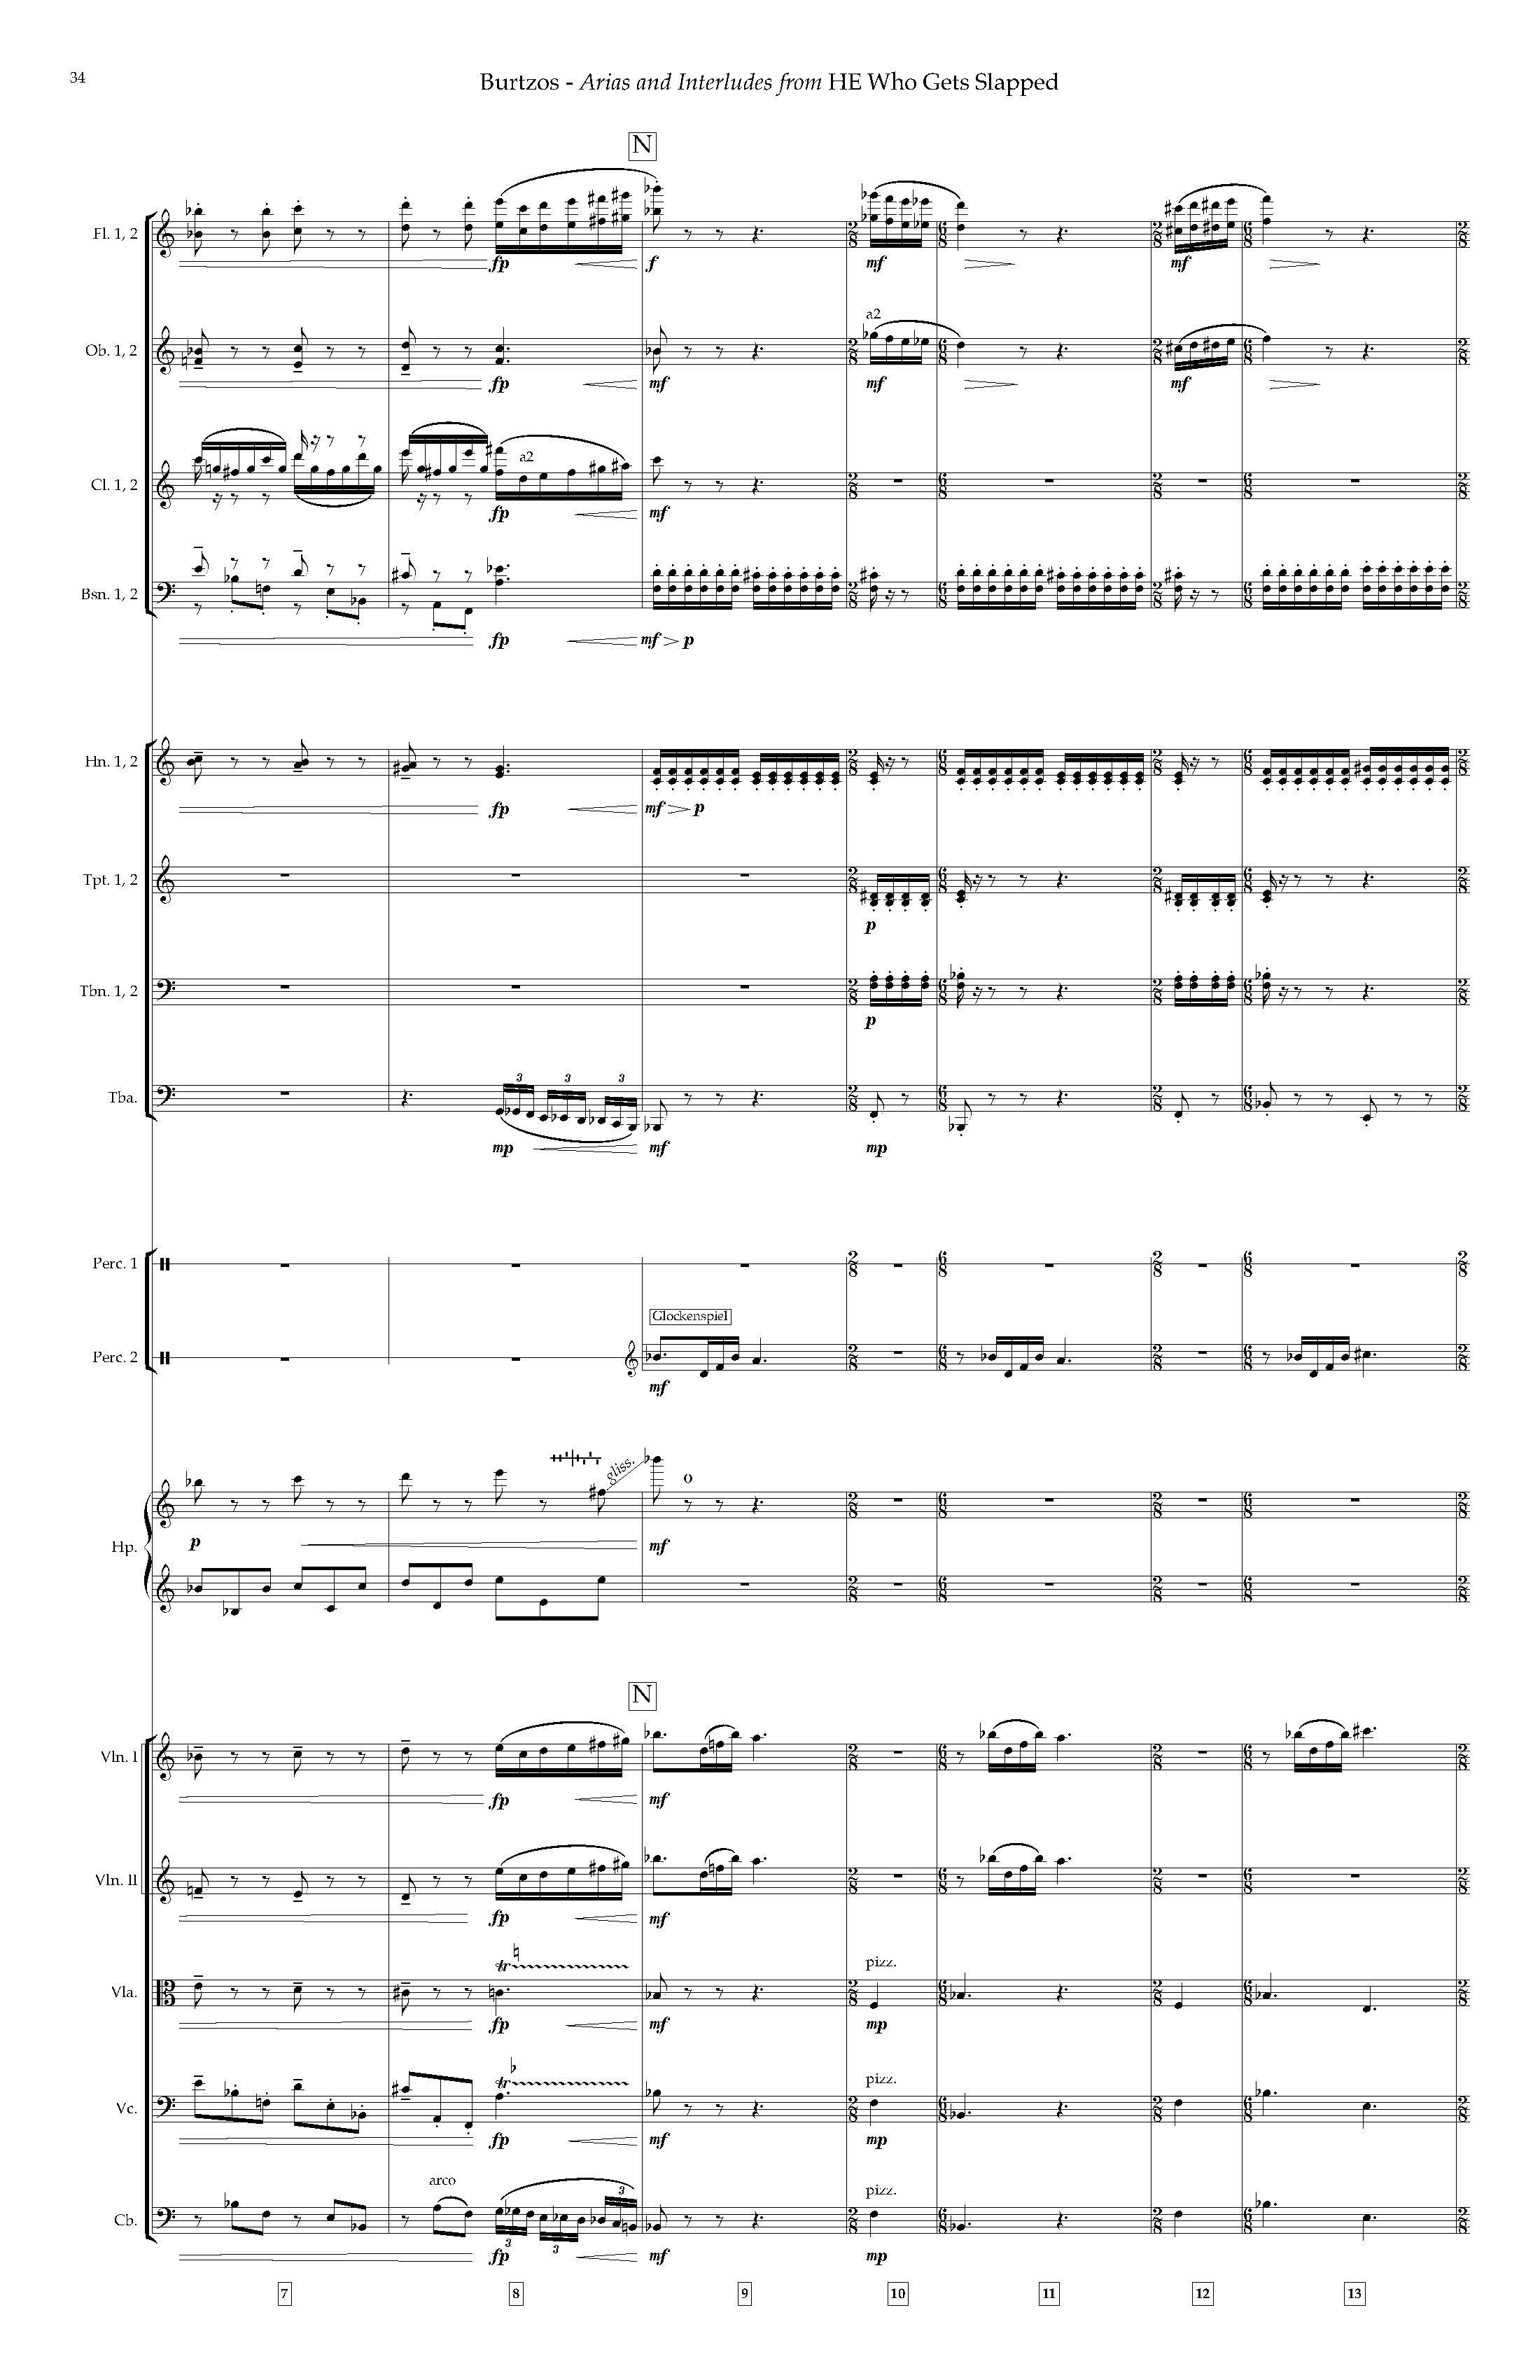 Arias and Interludes from HWGS - Complete Score_Page_40.jpg